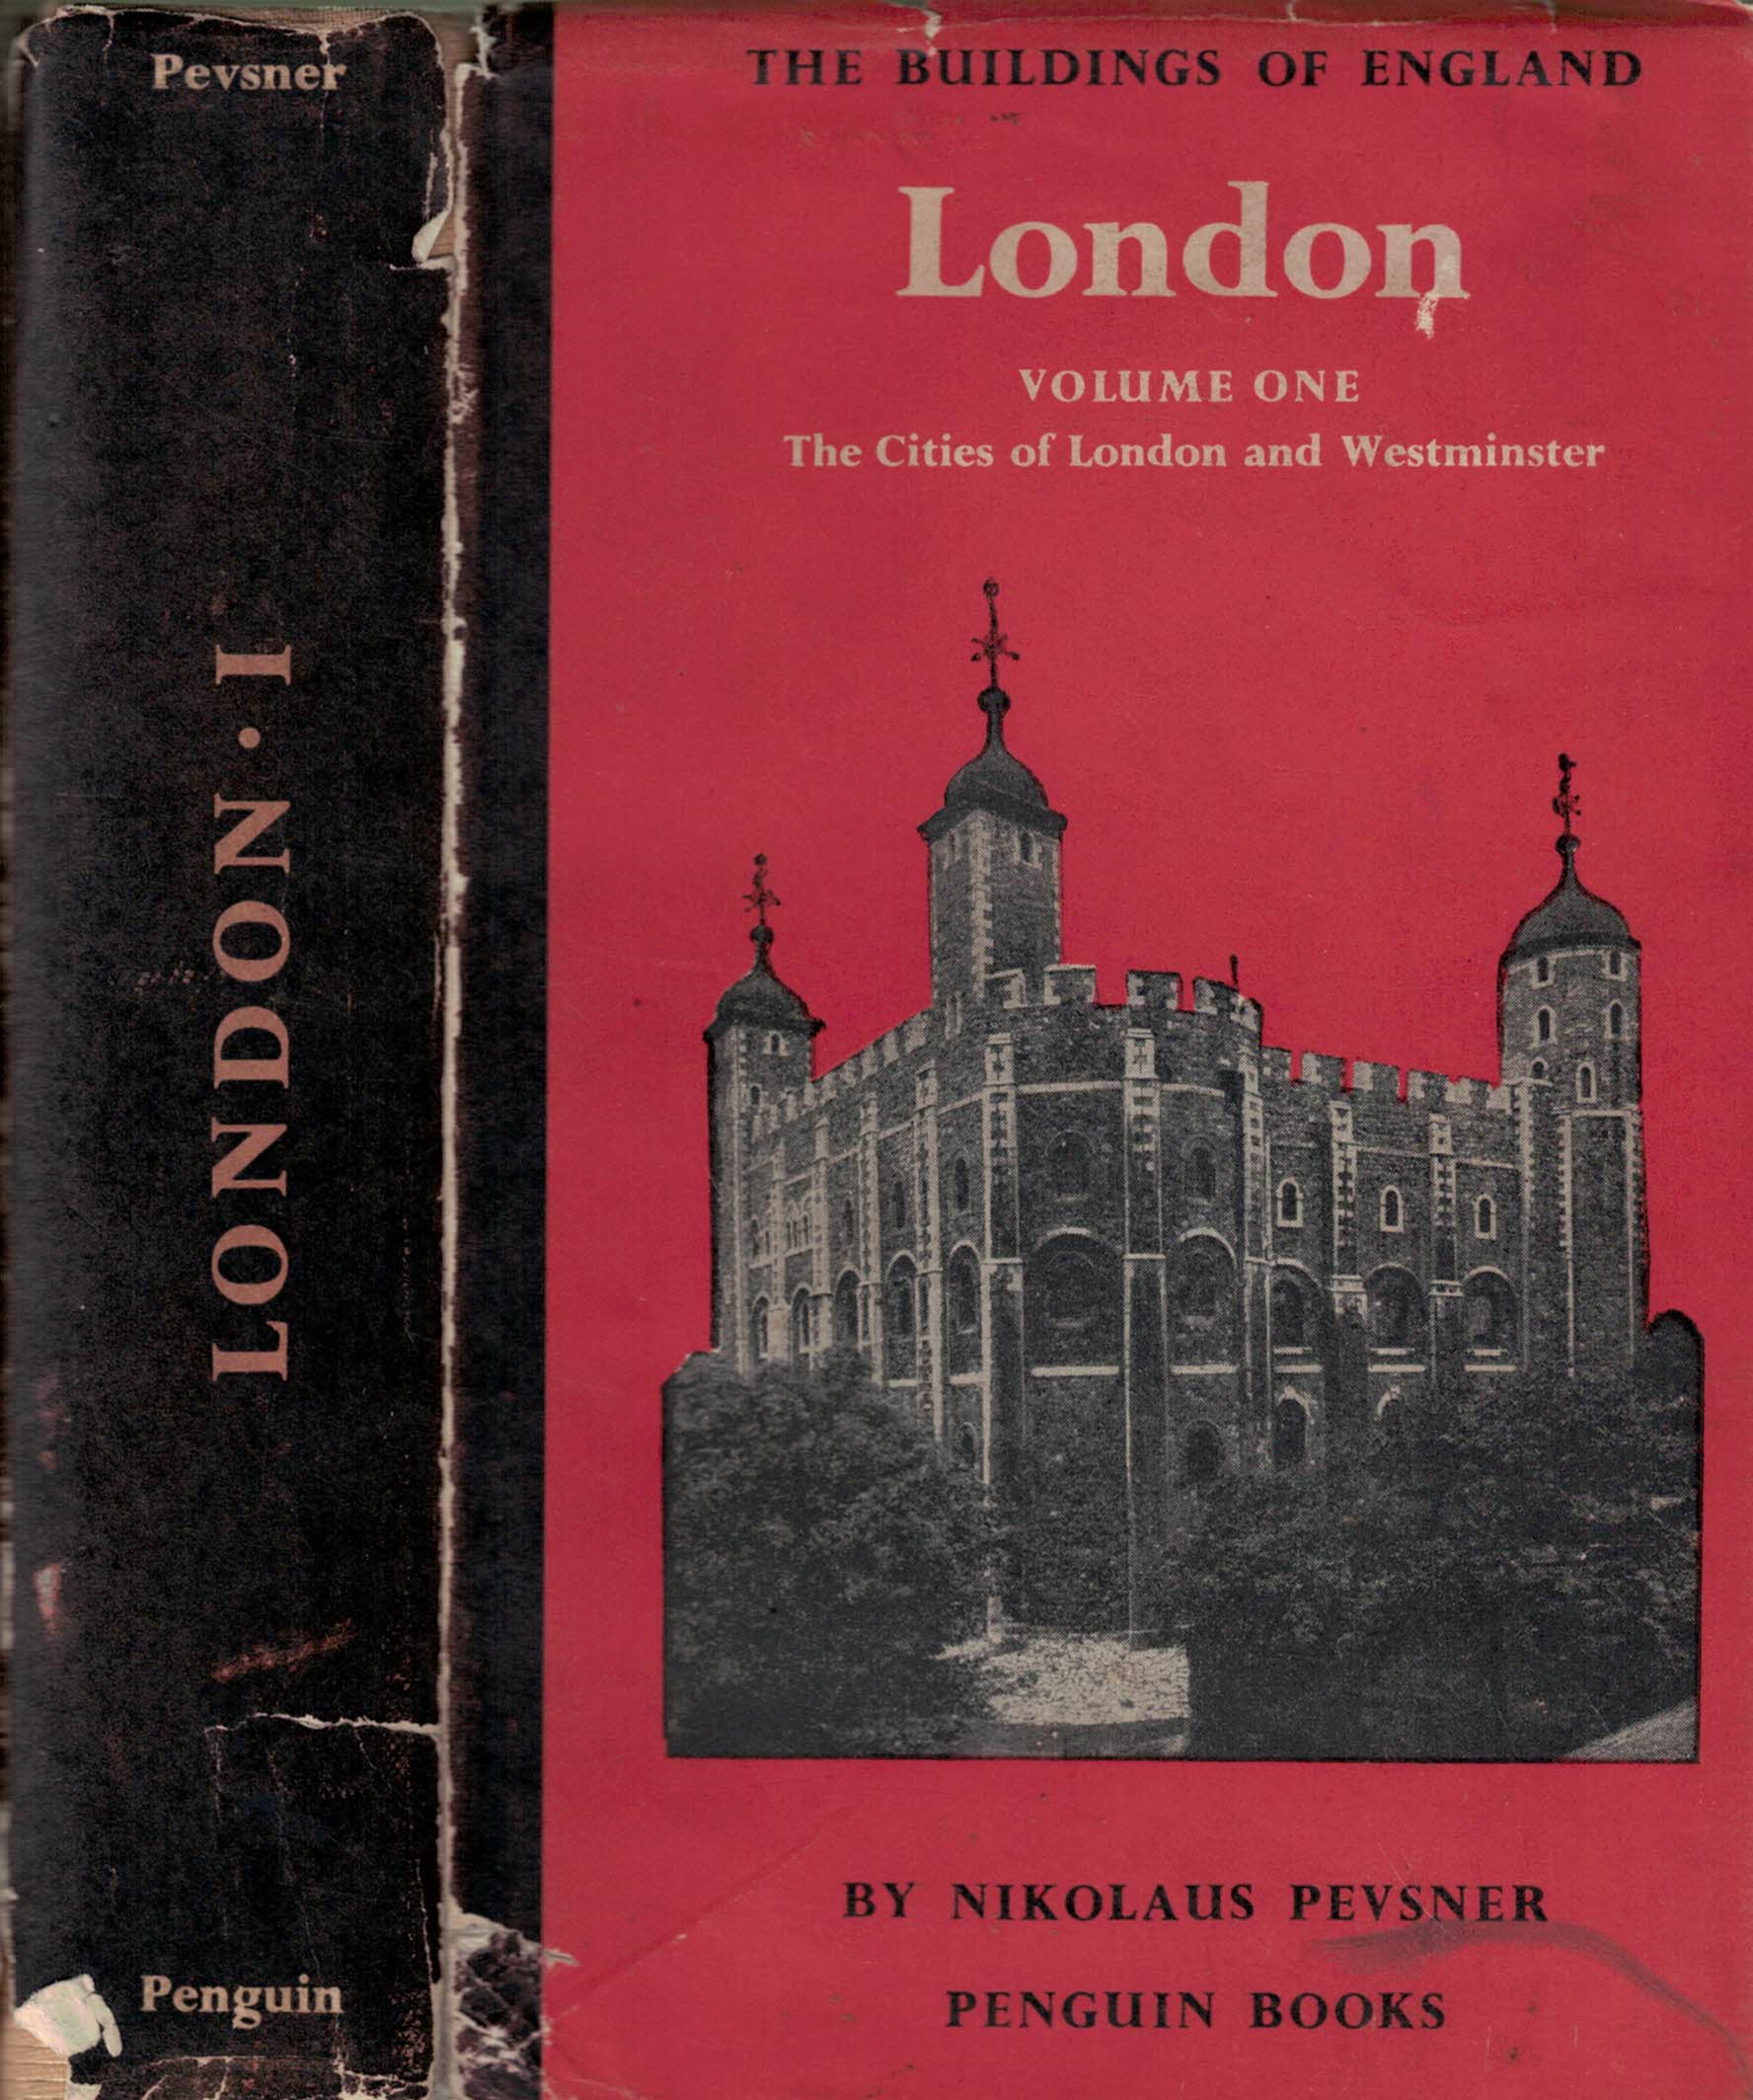 London Volume One: The Cities of London and Westminster. The Buildings of England. BE 12. 1957